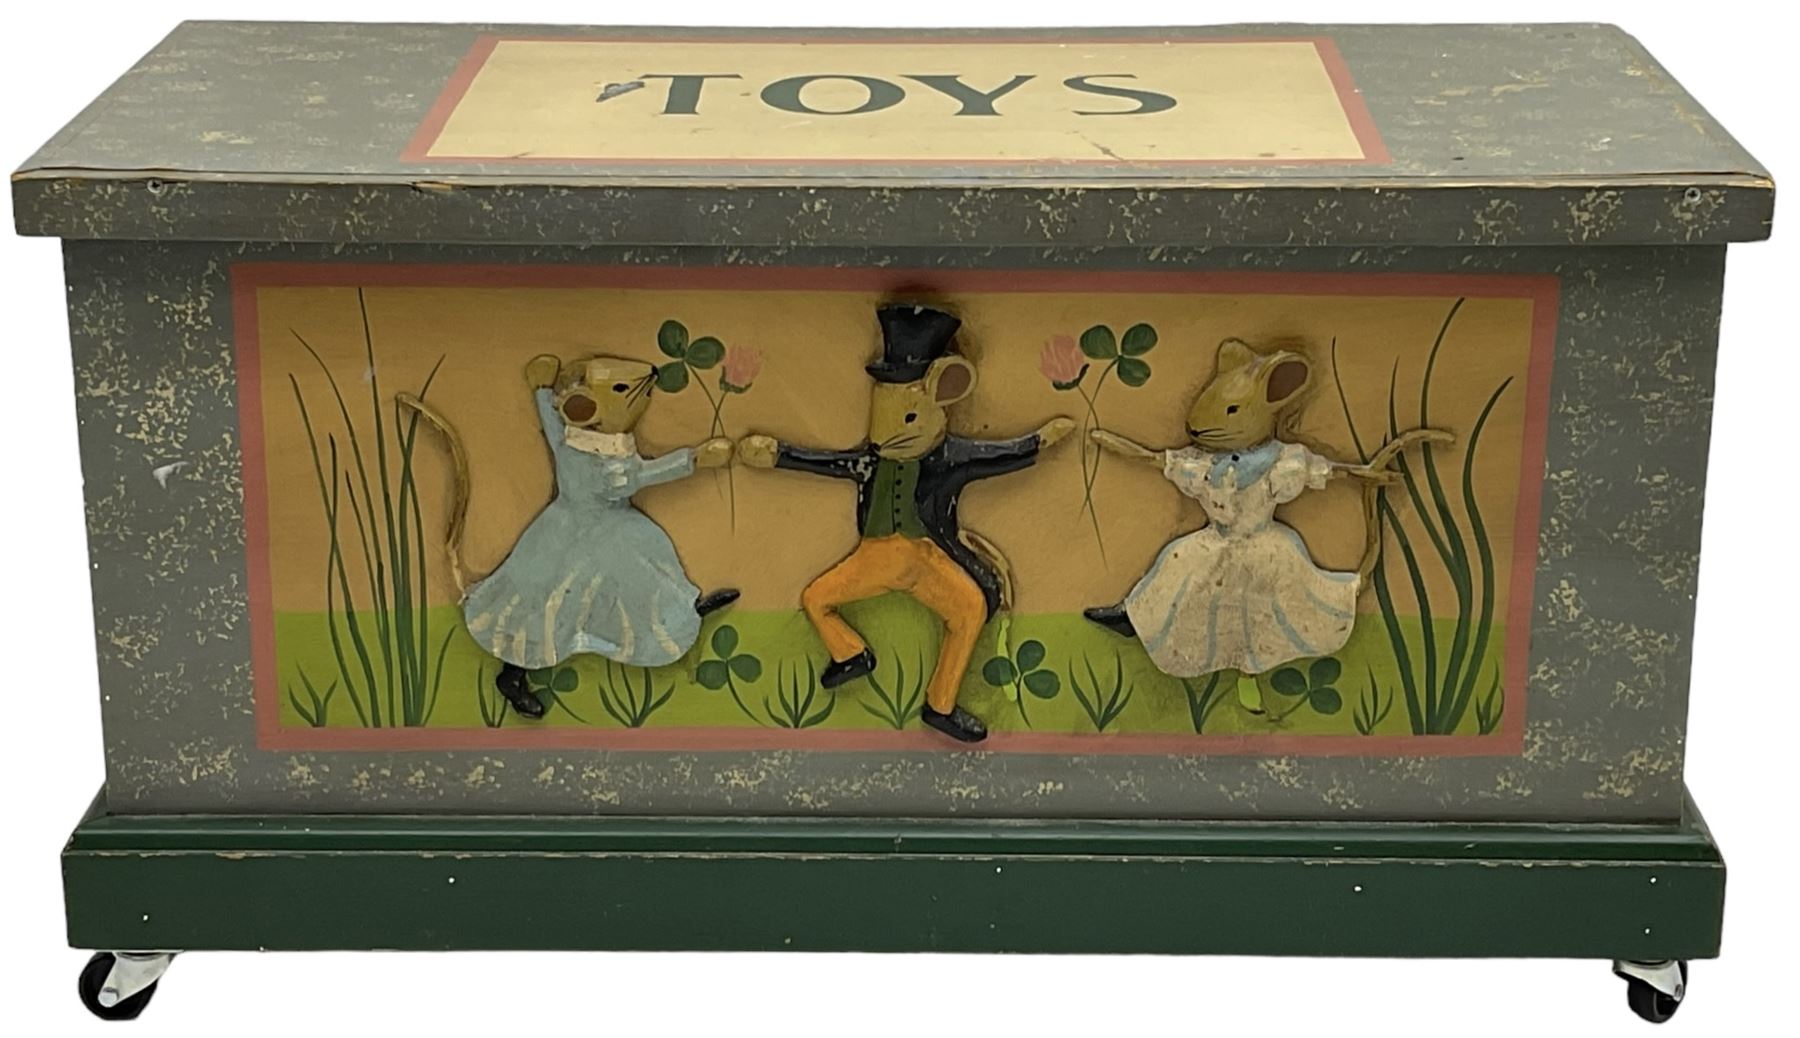 Painted wooden toy box on castors